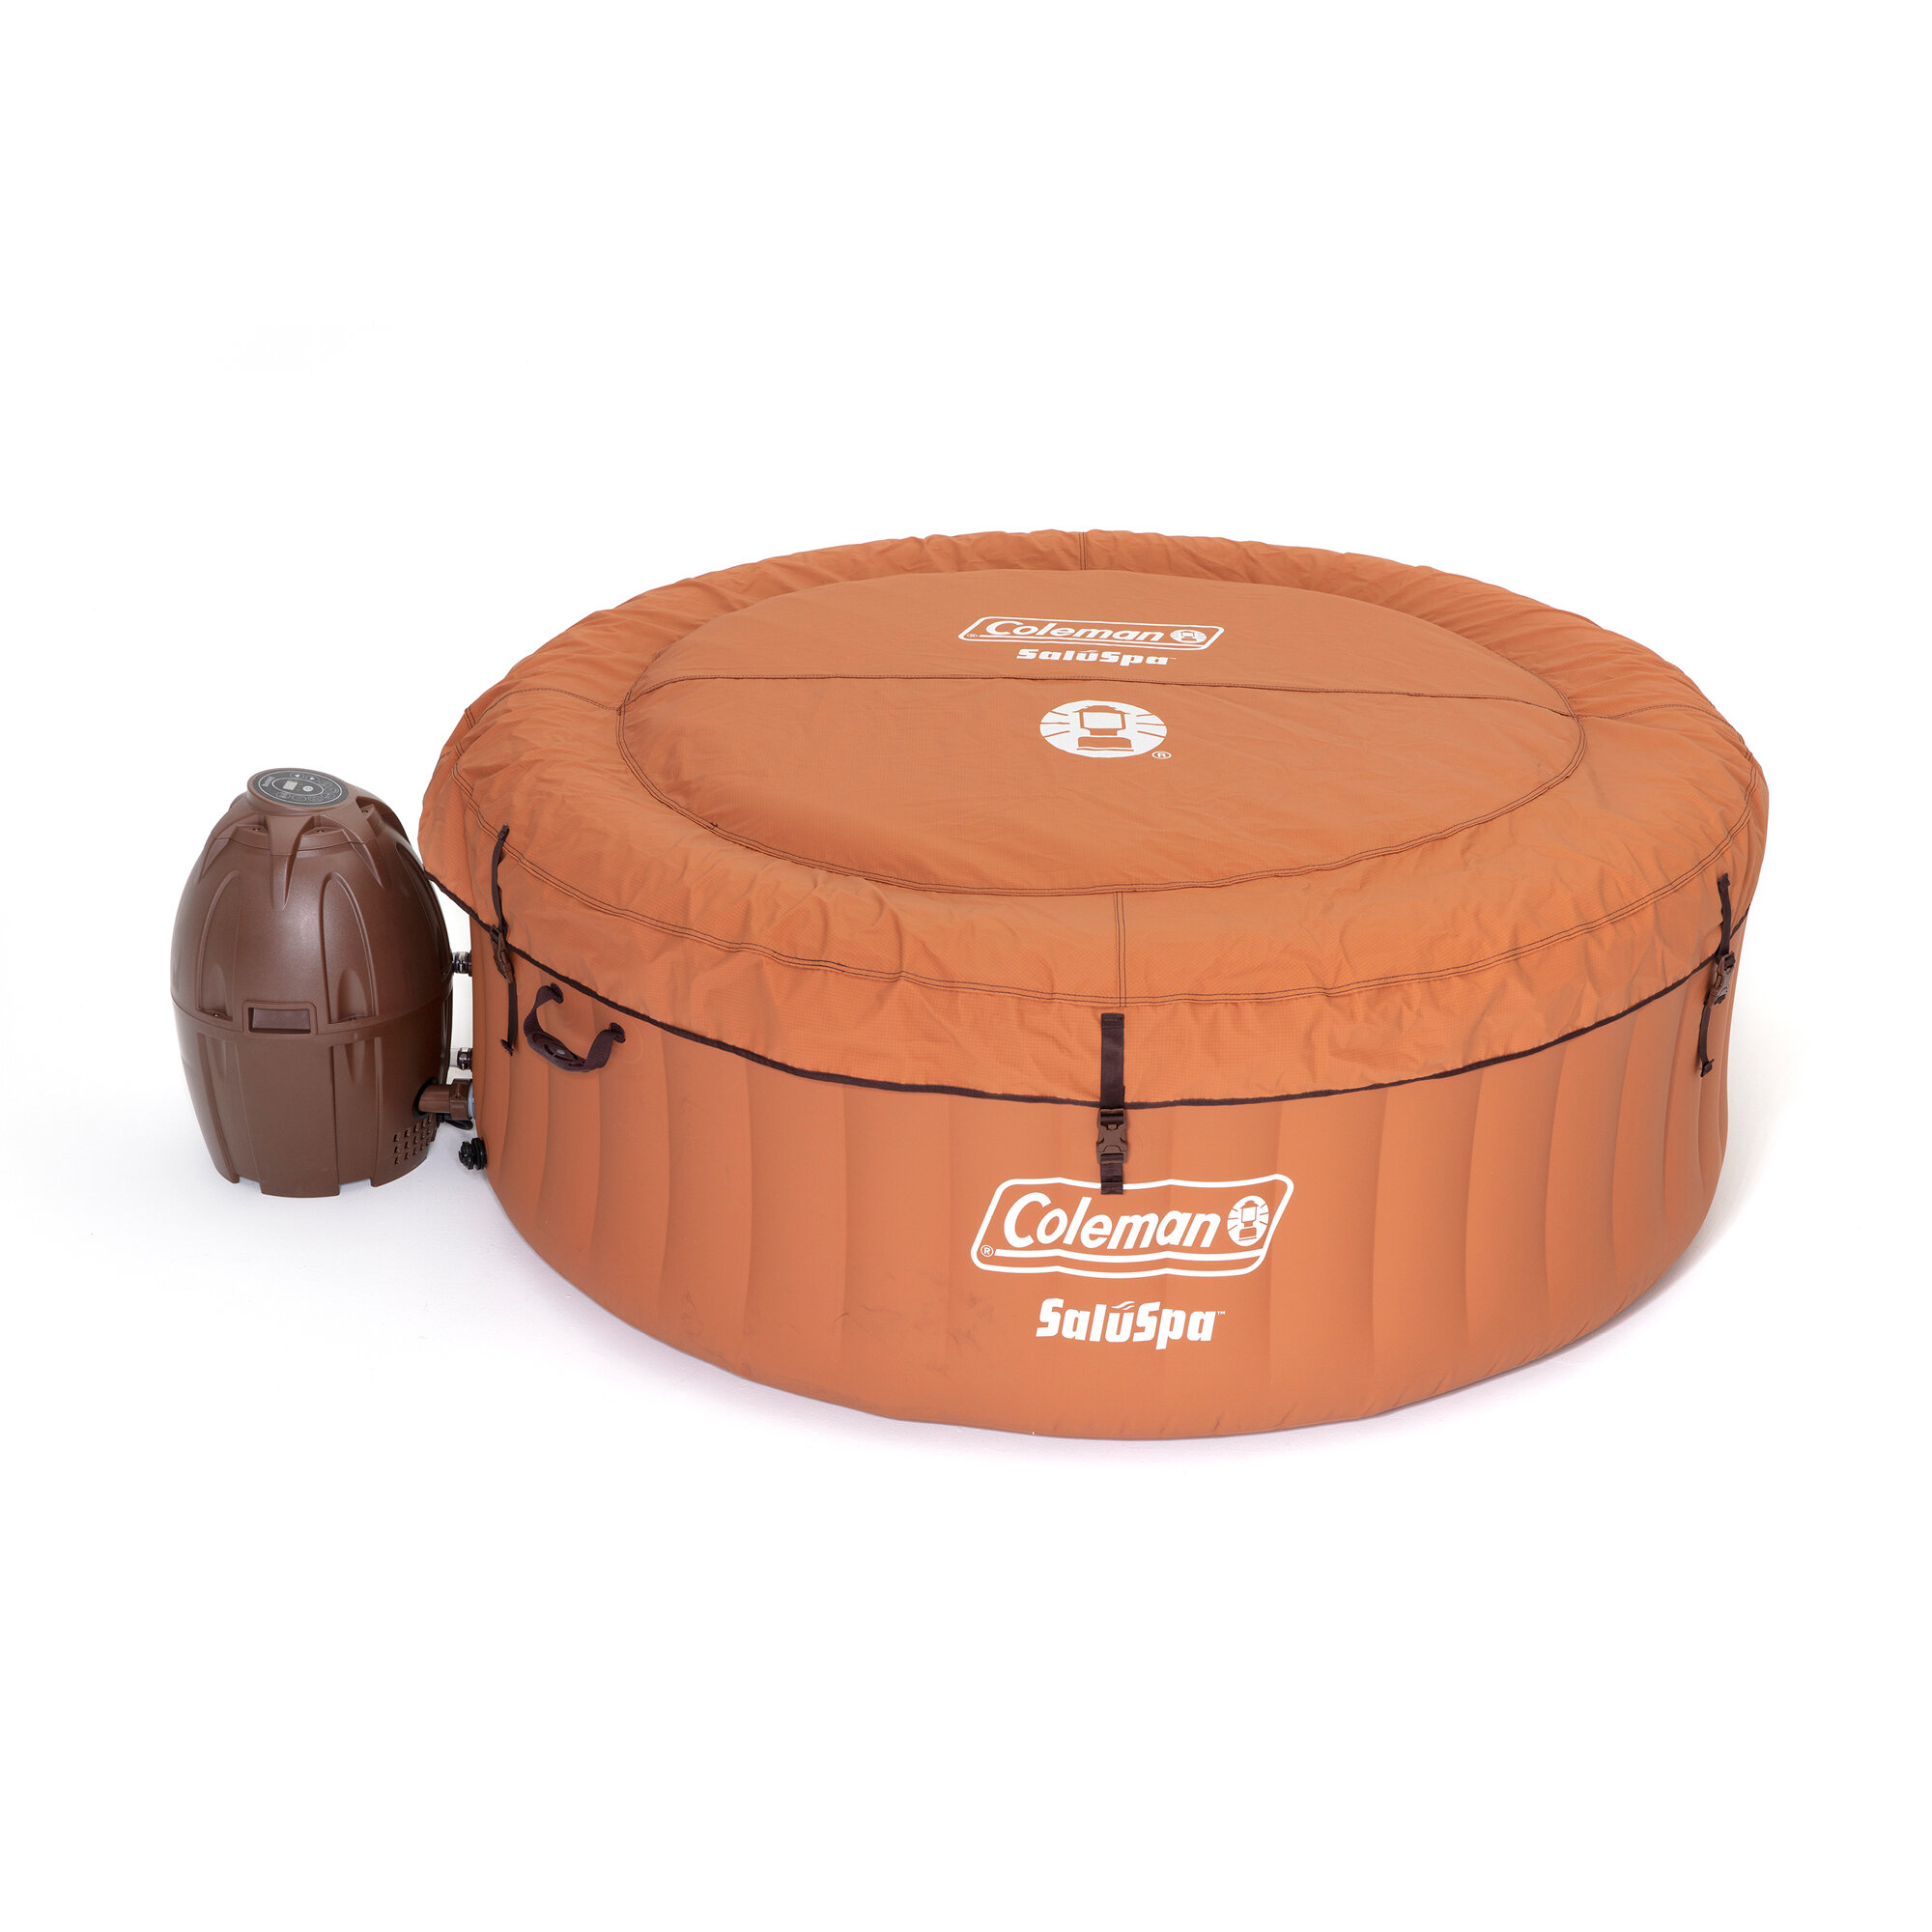 Orange Coleman 90455 SaluSpa Miami 71 x 26 4 Person Outdoor Portable Inflatable Hot Tub Spa with 120 Air Jets Pump and Cover 2 Filter Cartridges 